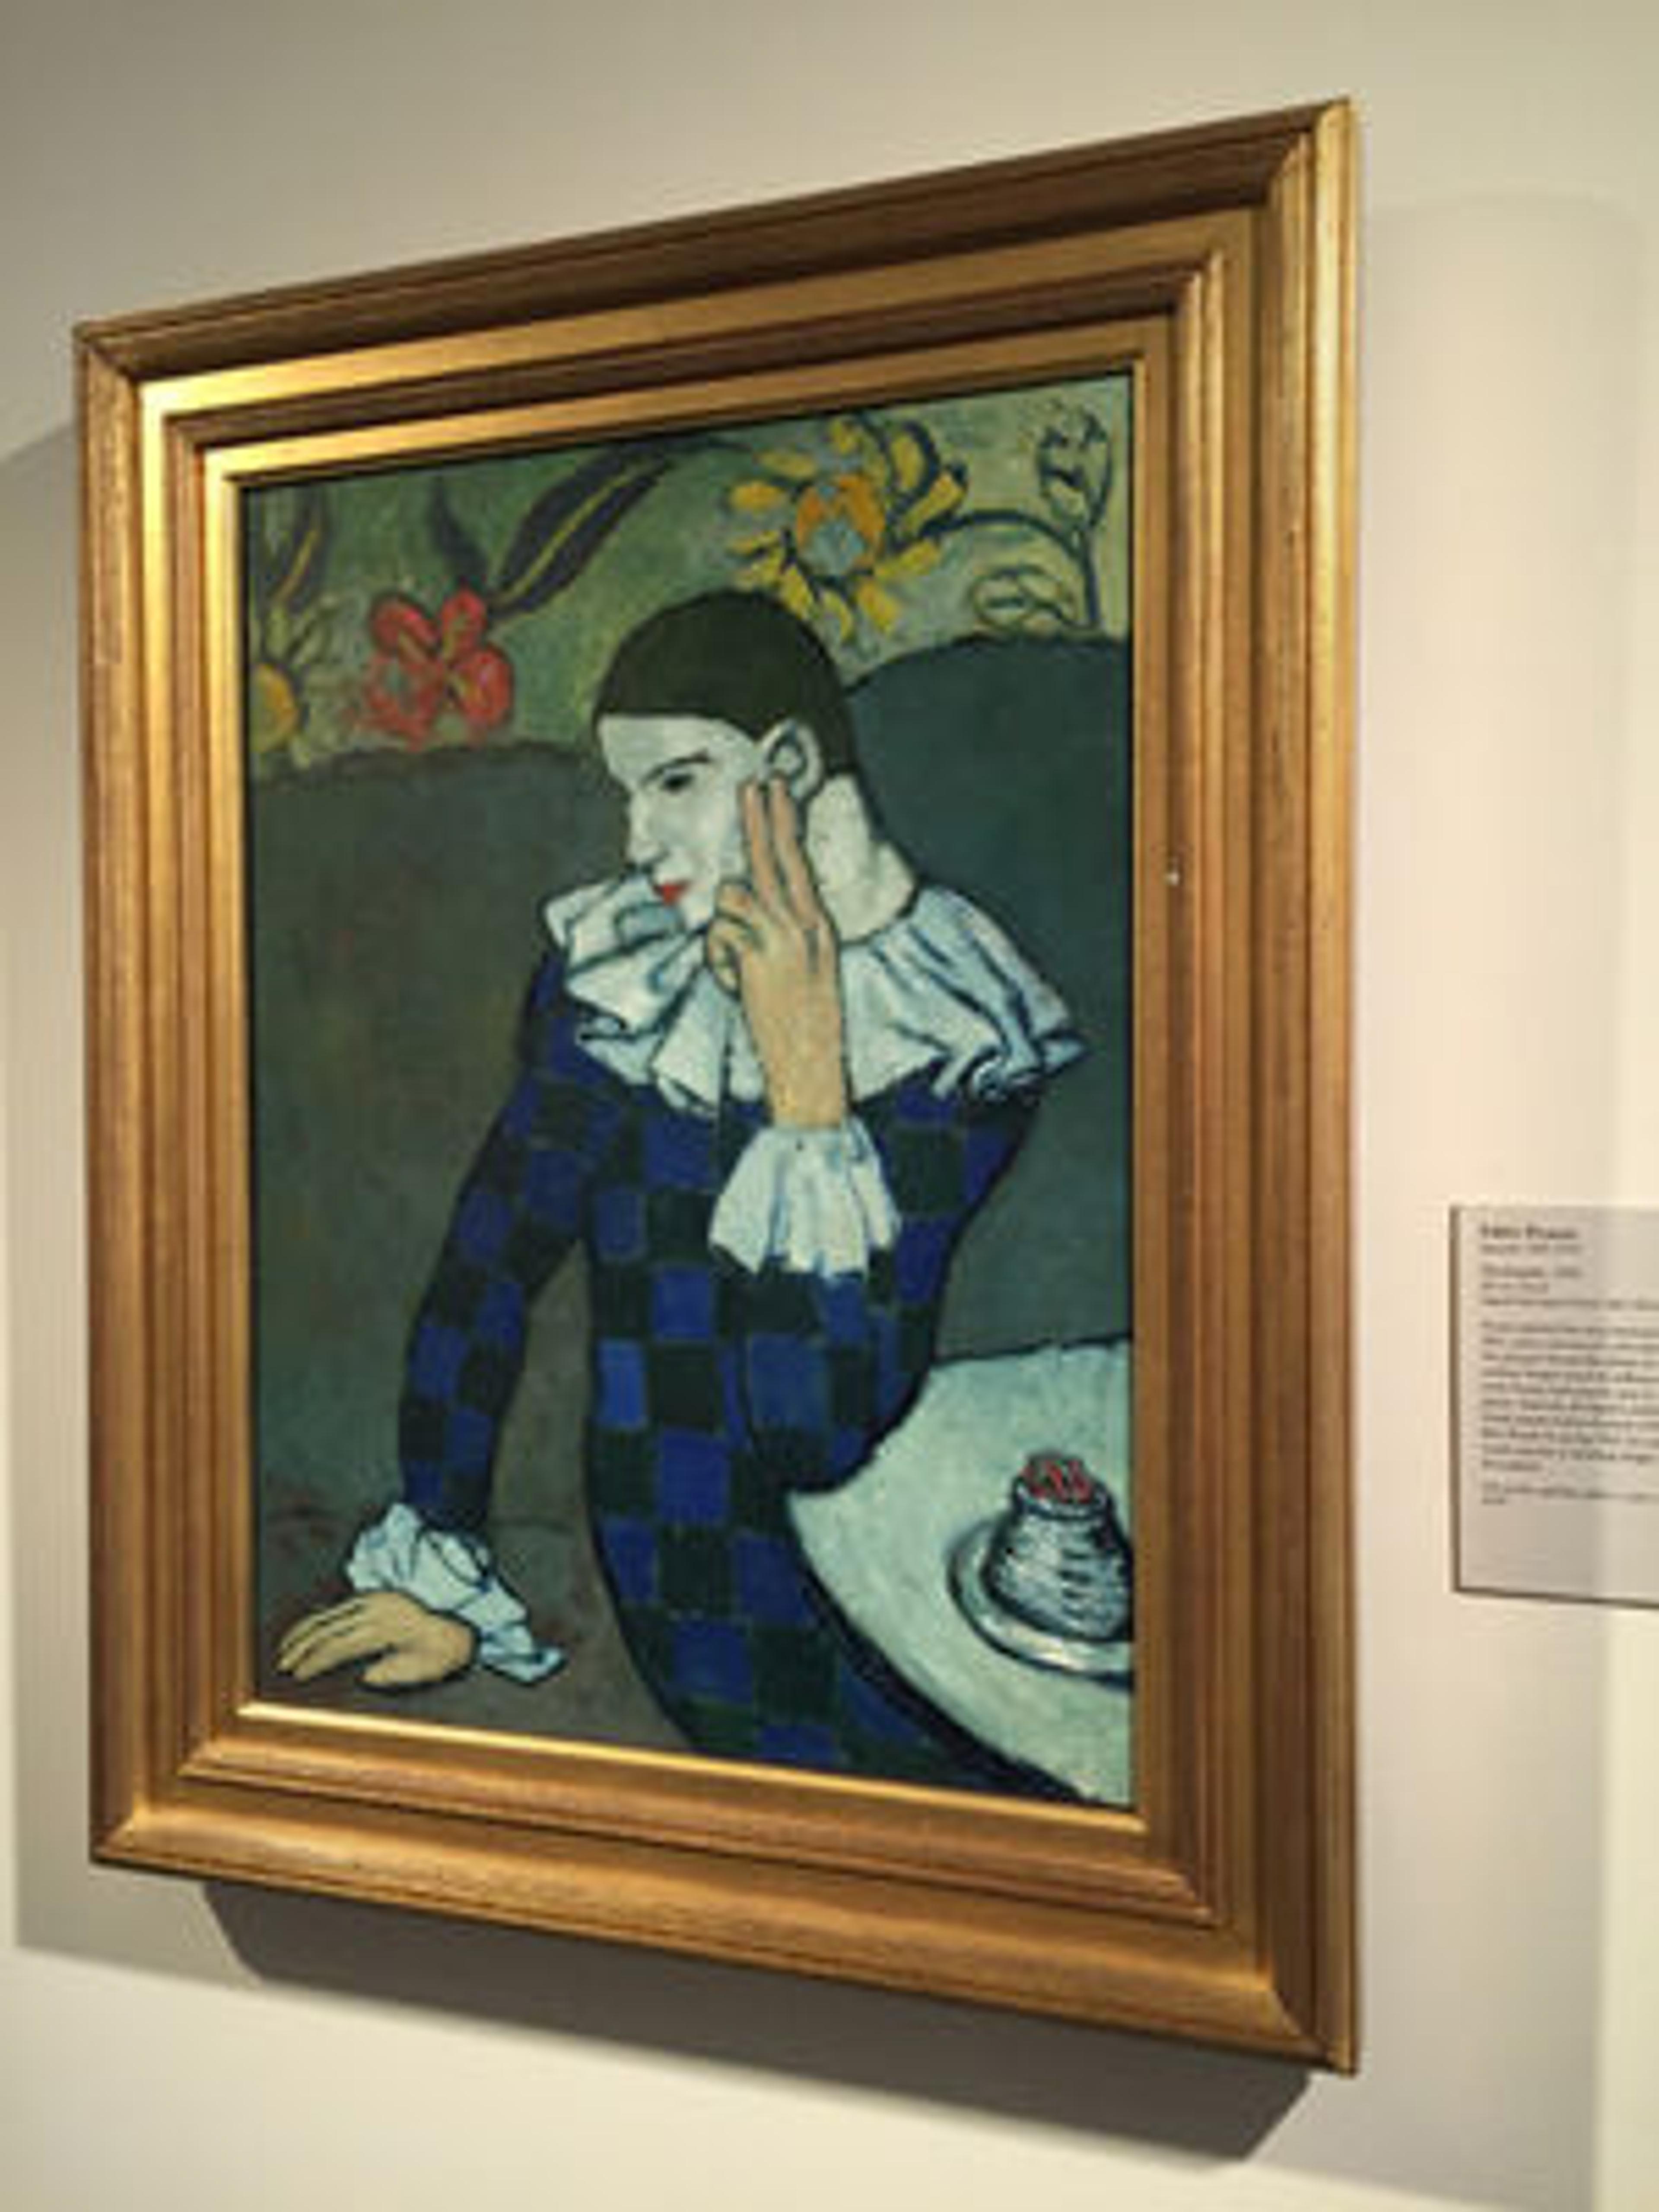 Pablo Picasso's "Harlequin," as displayed in the Modern and Contemporary Art galleries